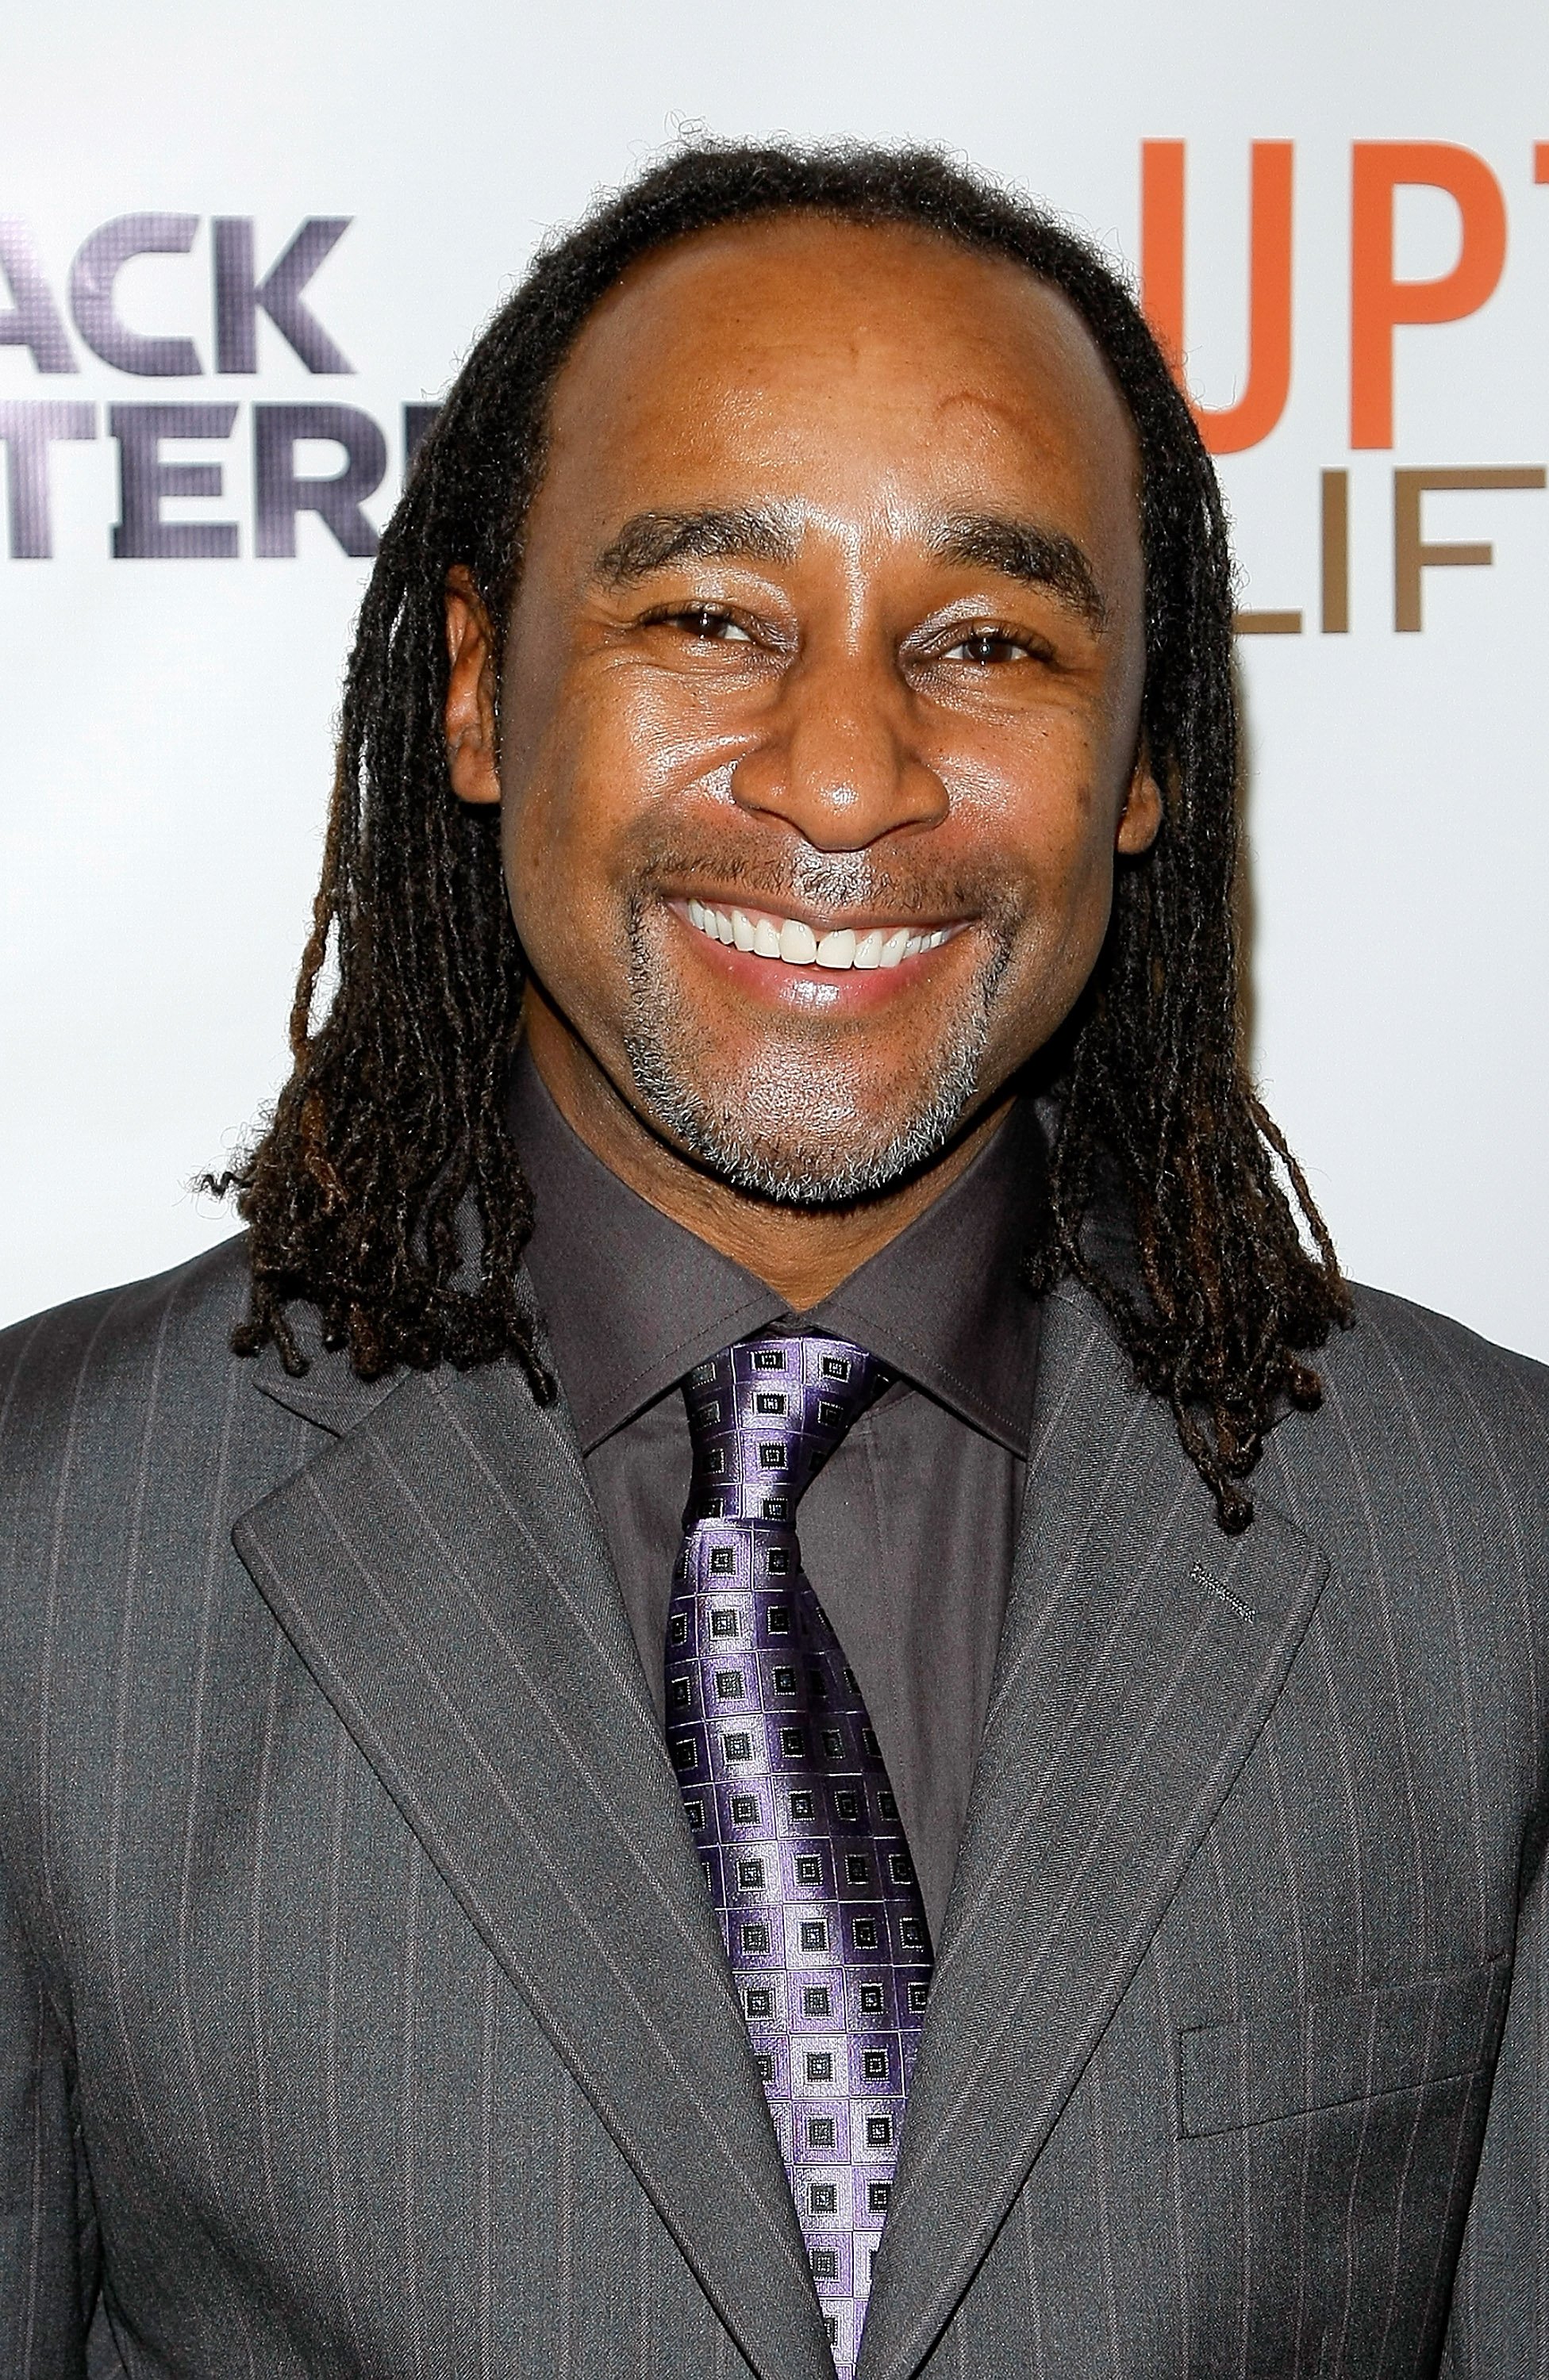  Author Eric Jerome Dickey attends the 5th Anniversary of the African American Literary Award Show at the Harlem Gatehouse on September 24, 2009 in New York City. | Source: Getty Images